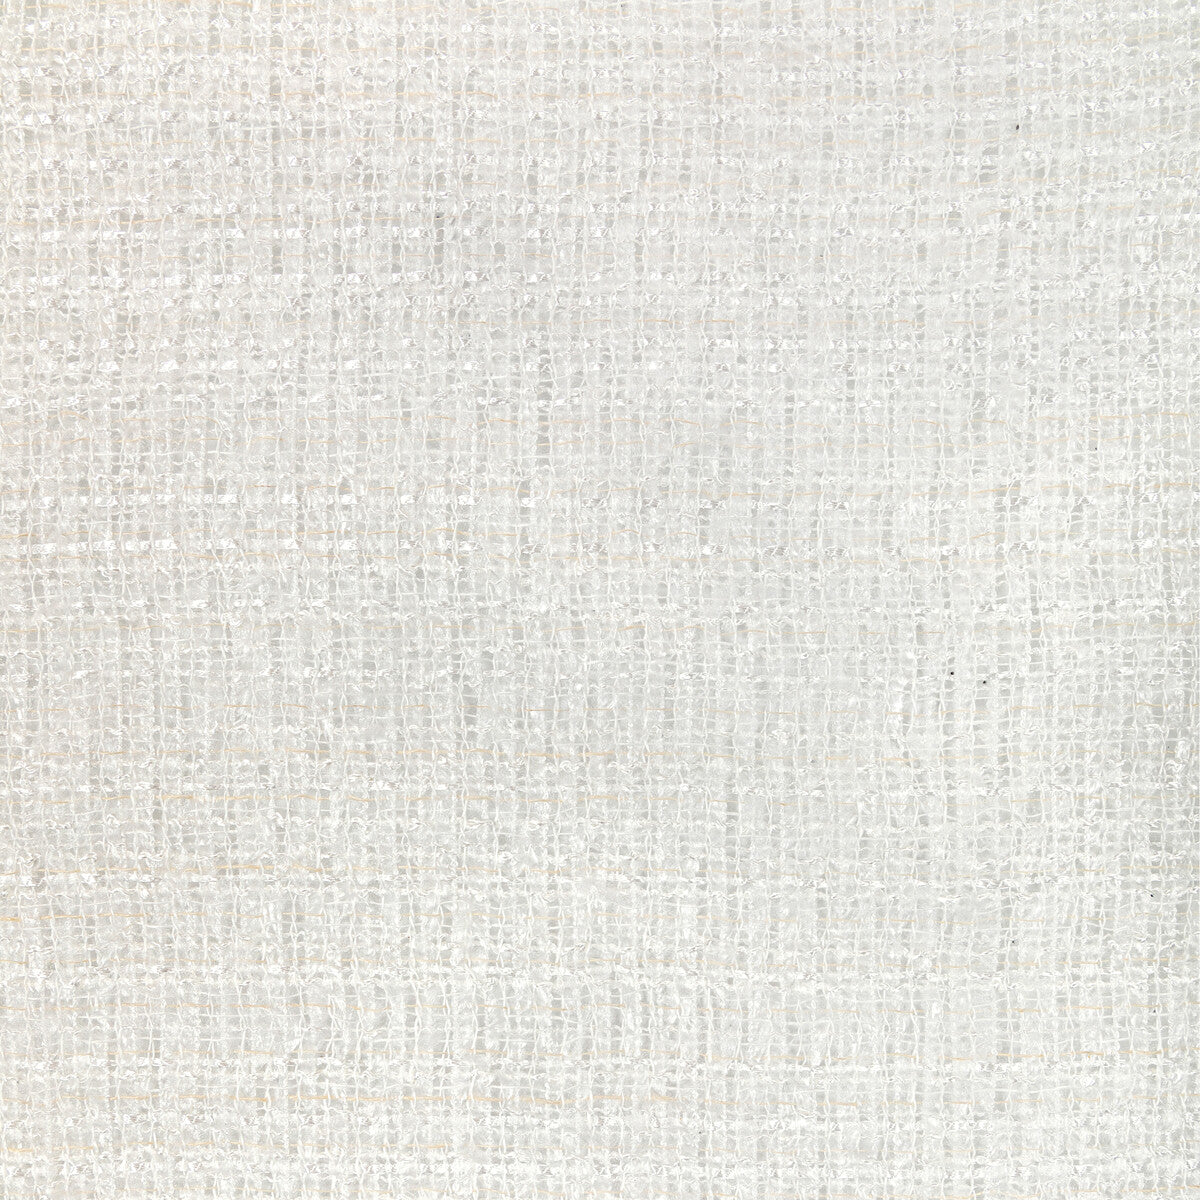 Soft Spoken fabric in ivory color - pattern 4889.101.0 - by Kravet Couture in the Modern Luxe III collection